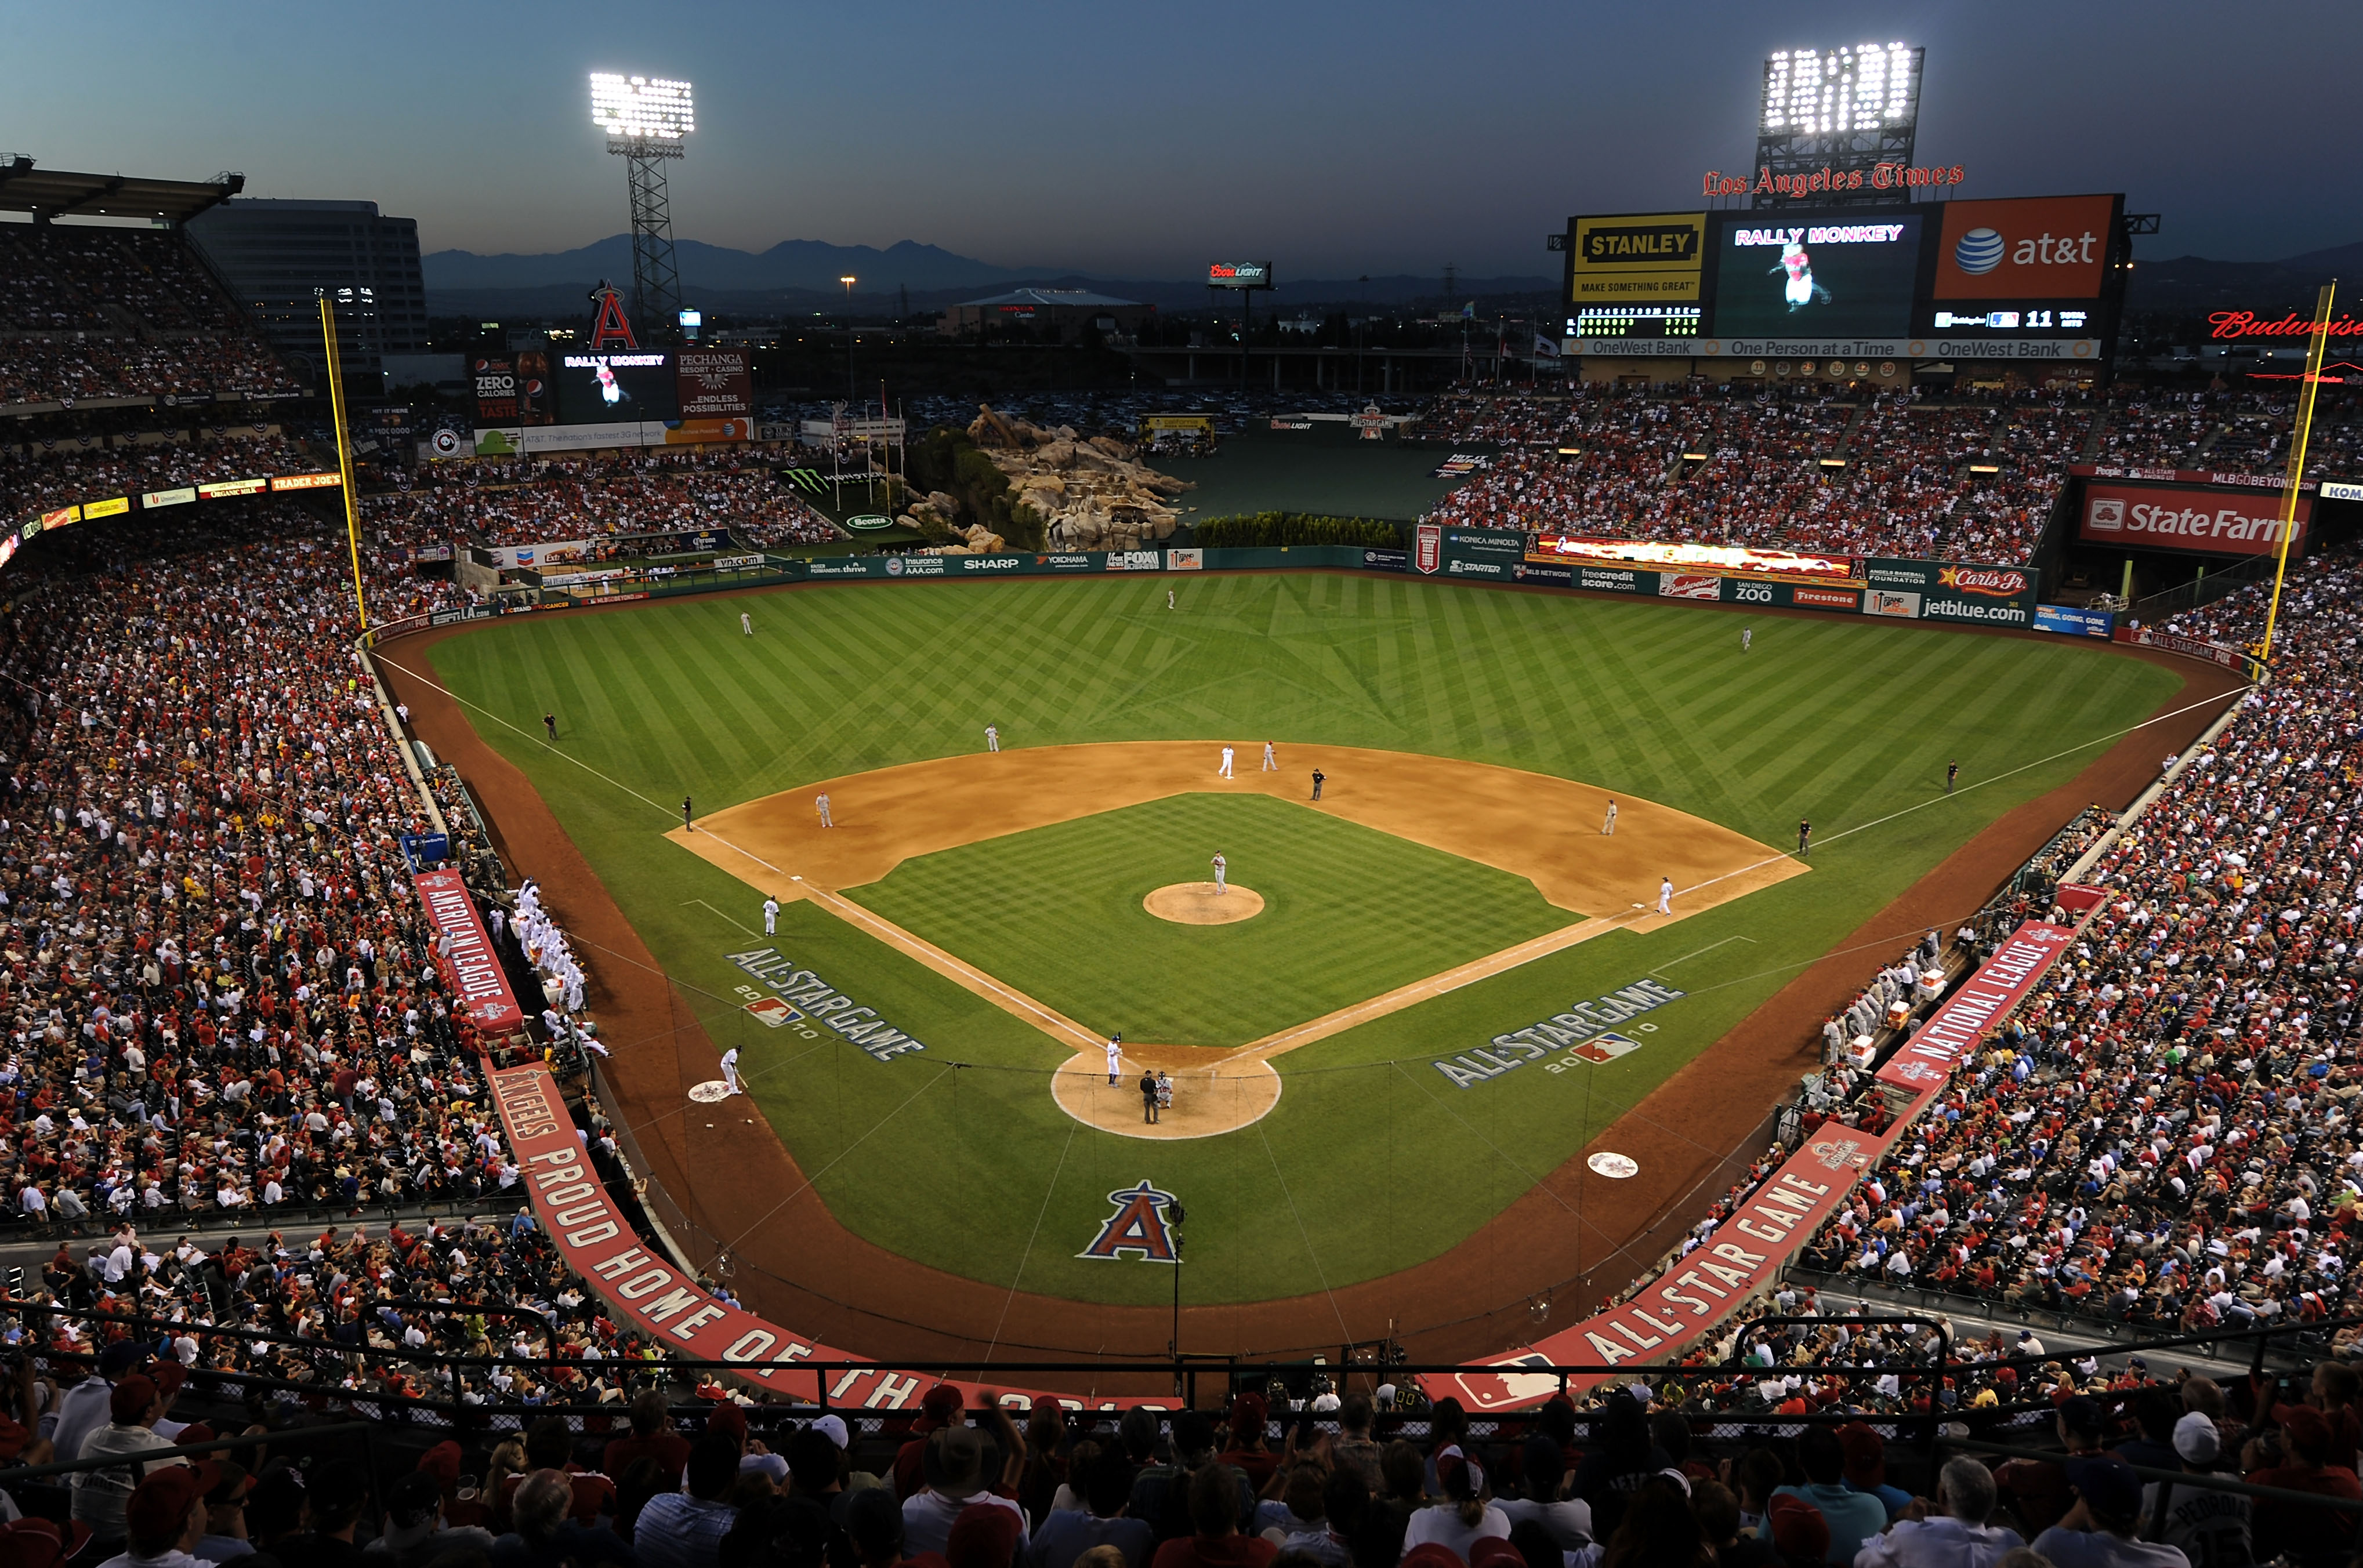 ANAHEIM, CA - JULY 13:  General view of atmosphere during the 81st MLB All-Star Game at Angel Stadium of Anaheim on July 13, 2010 in Anaheim, California.  (Photo by Michael Buckner/Getty Images)